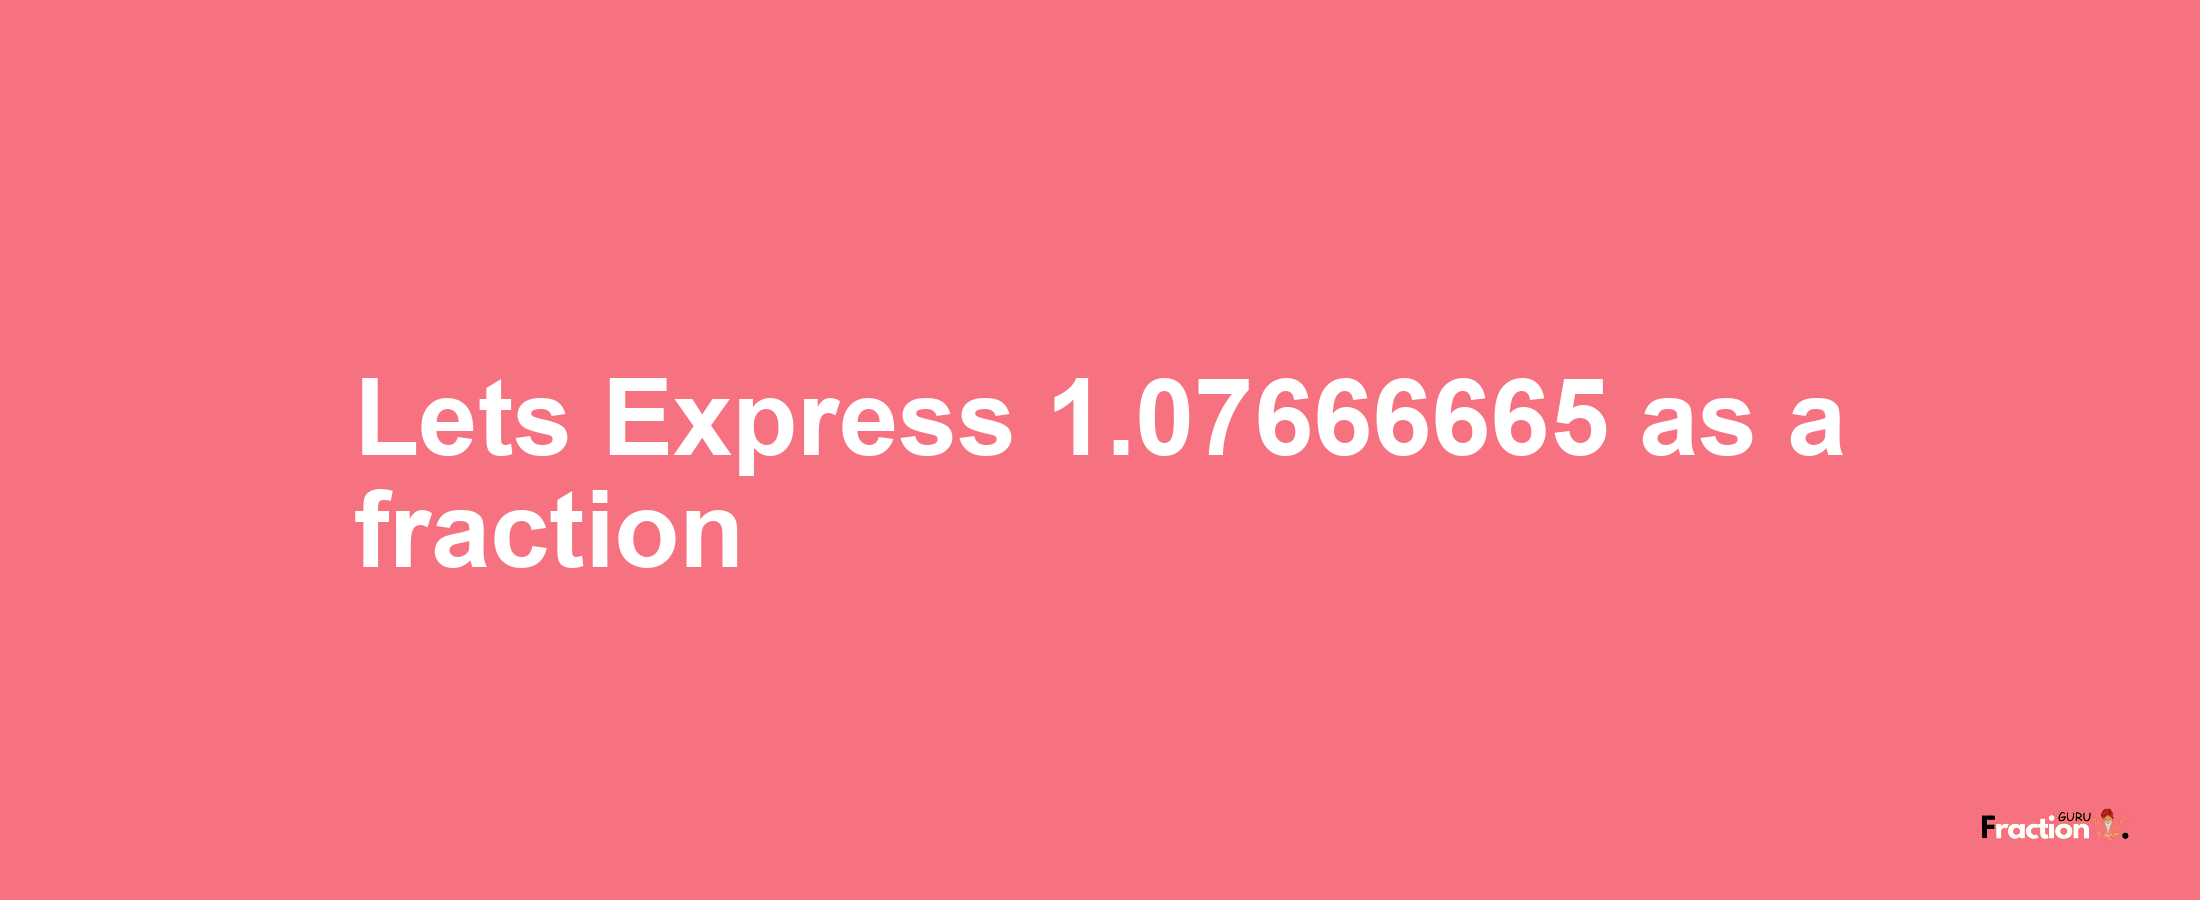 Lets Express 1.07666665 as afraction